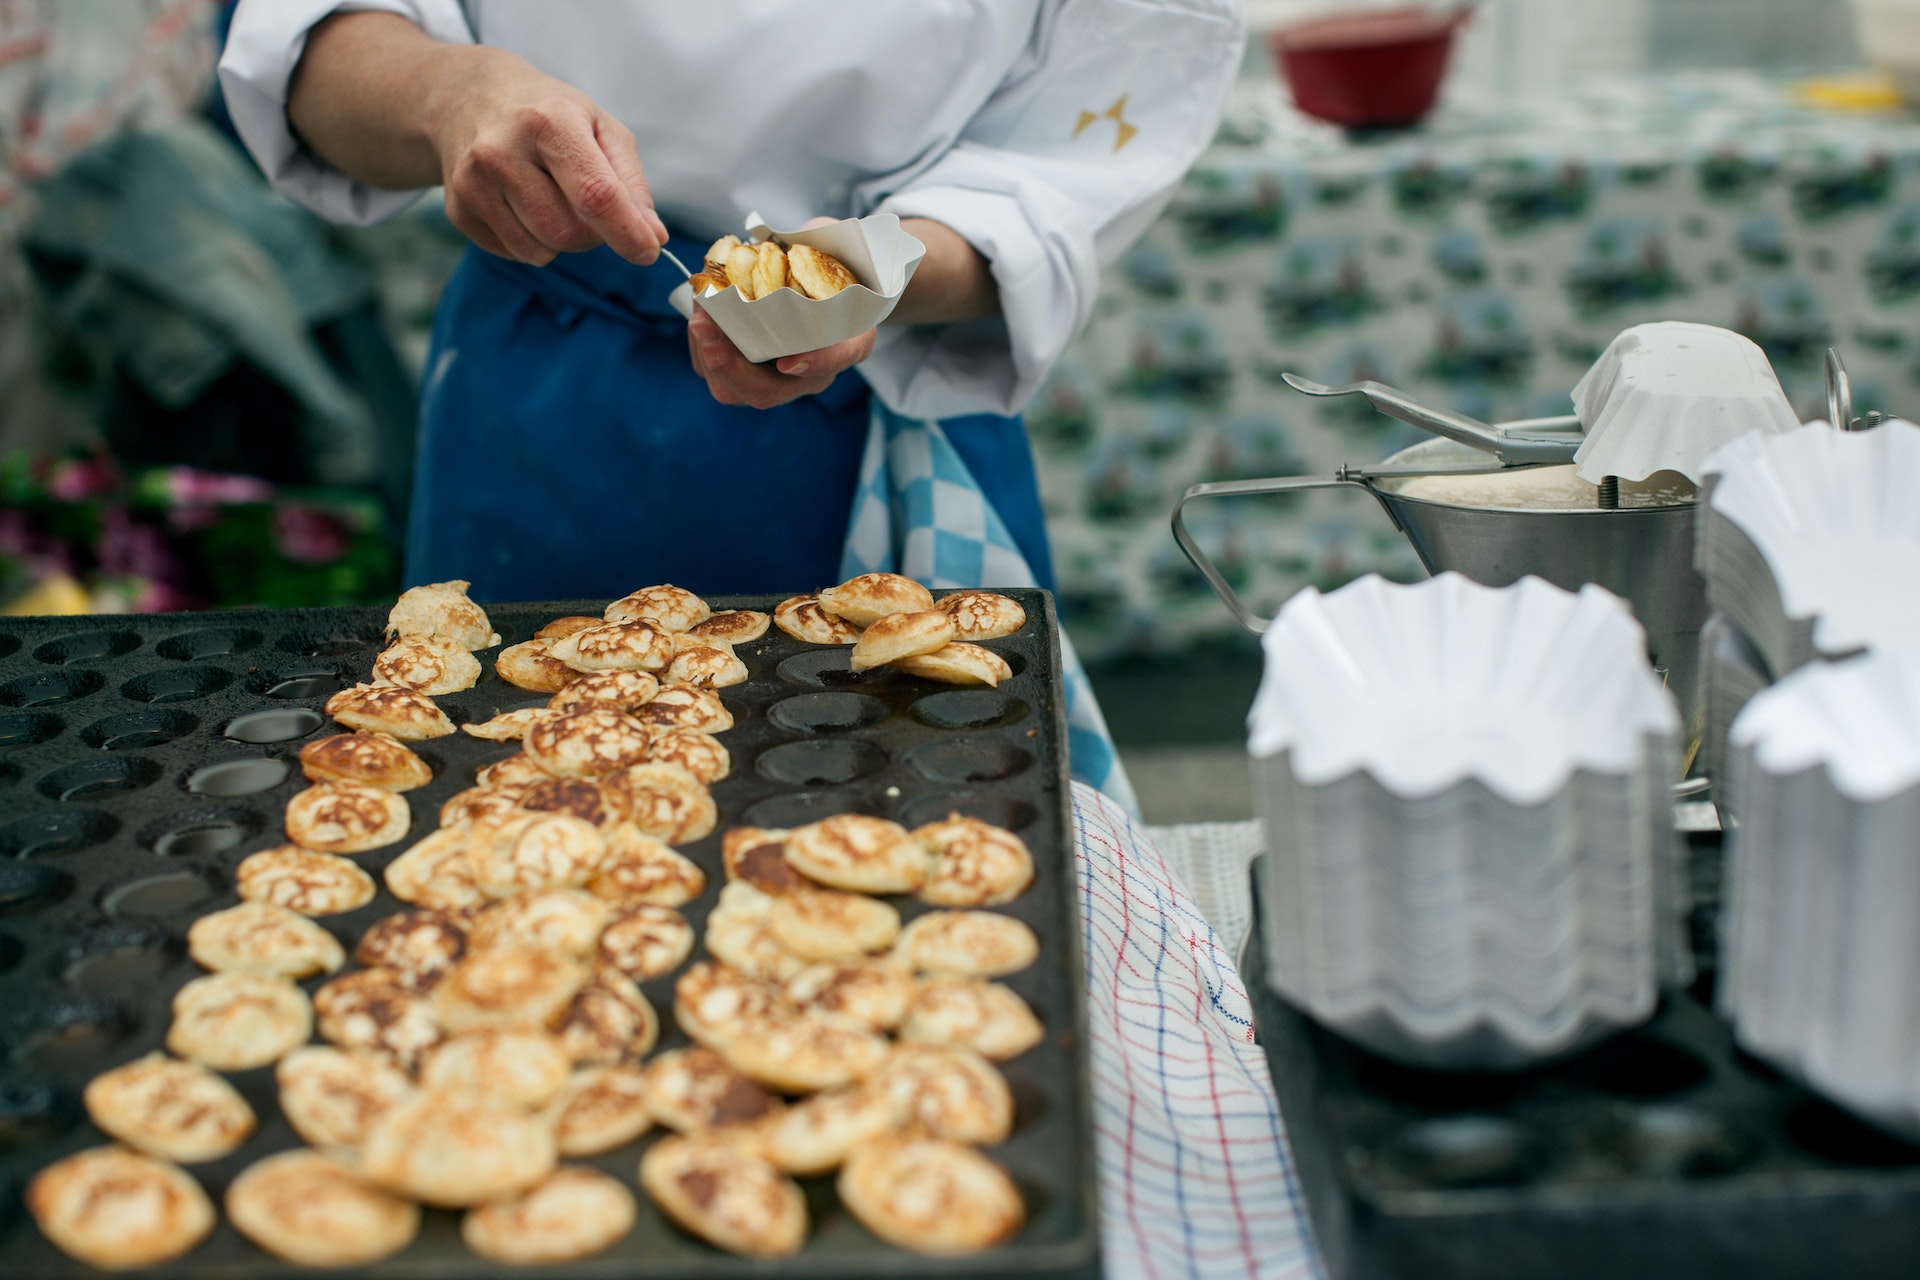 A chef places small pancakes into a cardboard tray at a street market